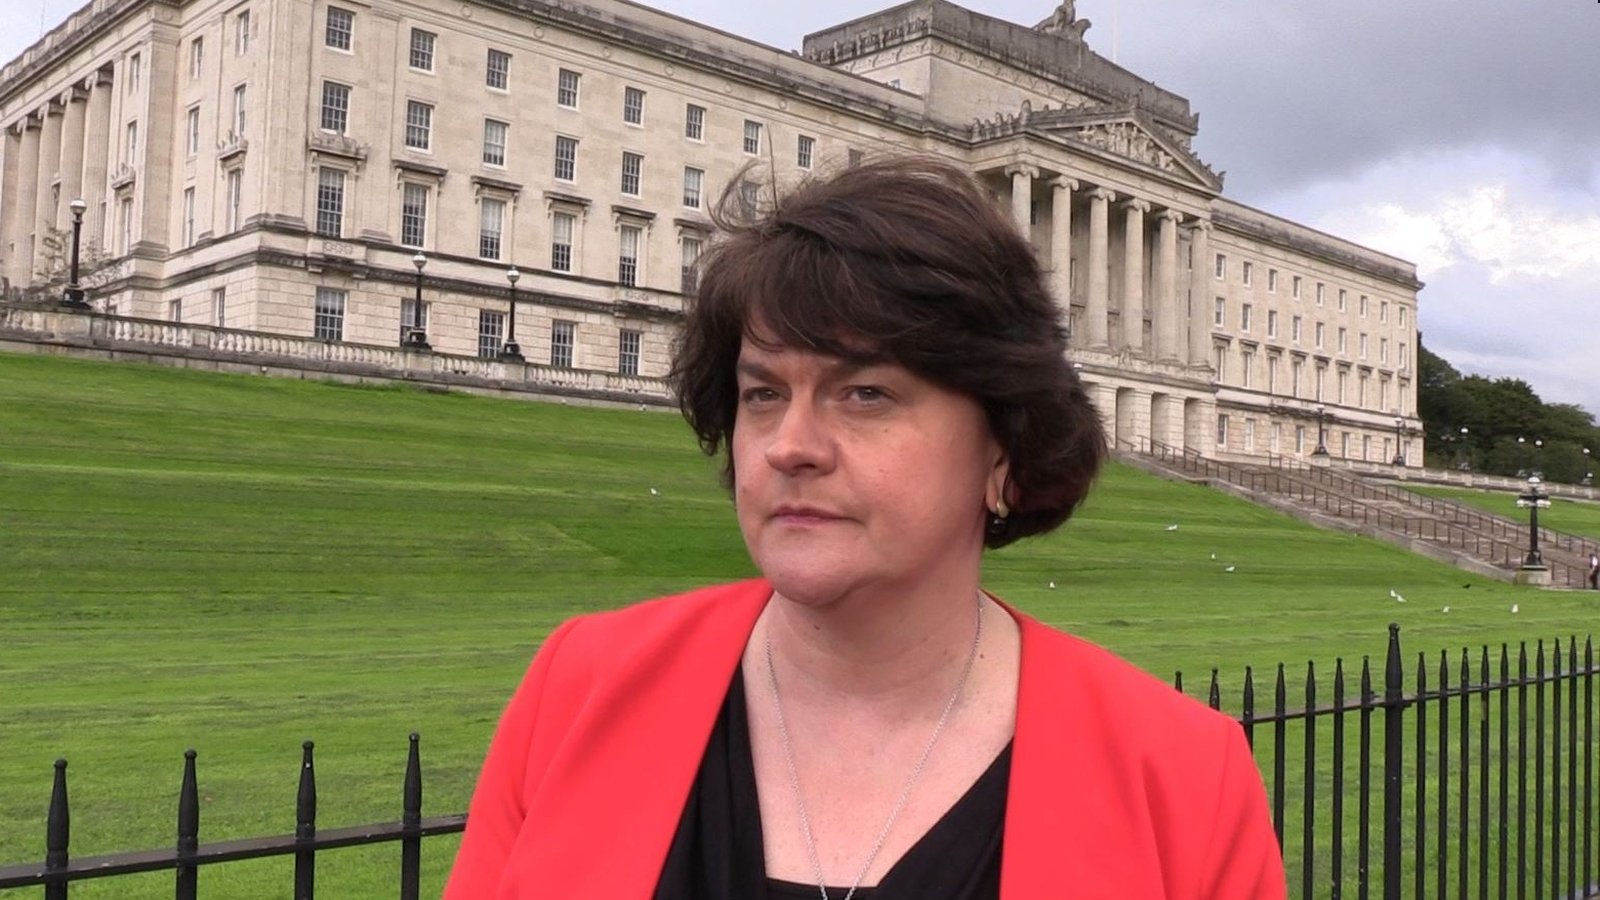 Foster opposes DUP's veto use in regulatory discussions

